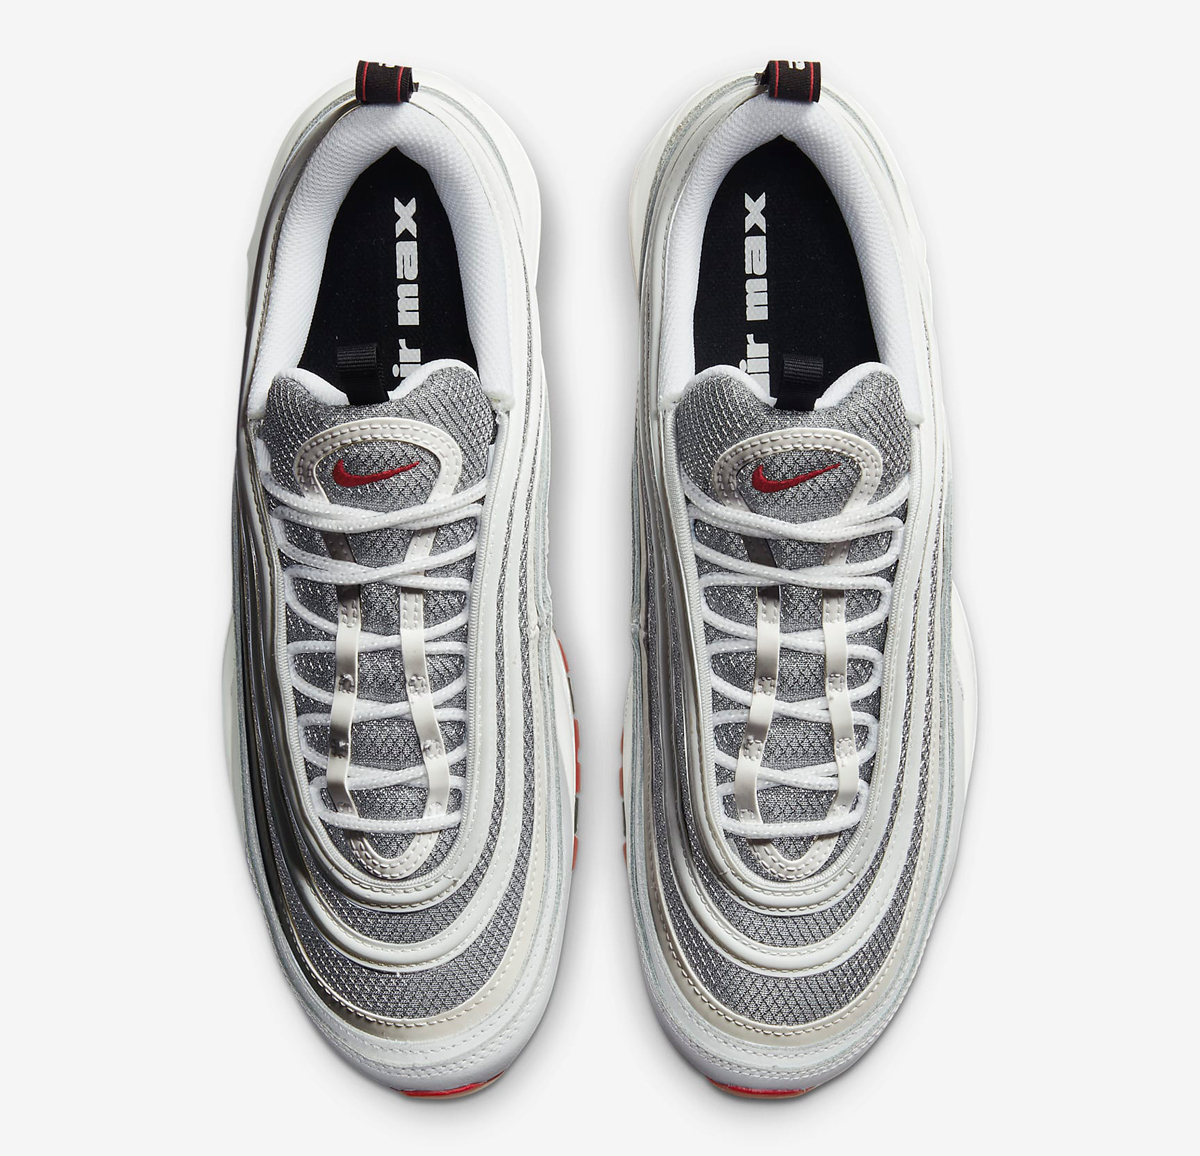 nike-air-max-97-prototype-white-particle-grey-photon-dust-varsity-red-release-date-4